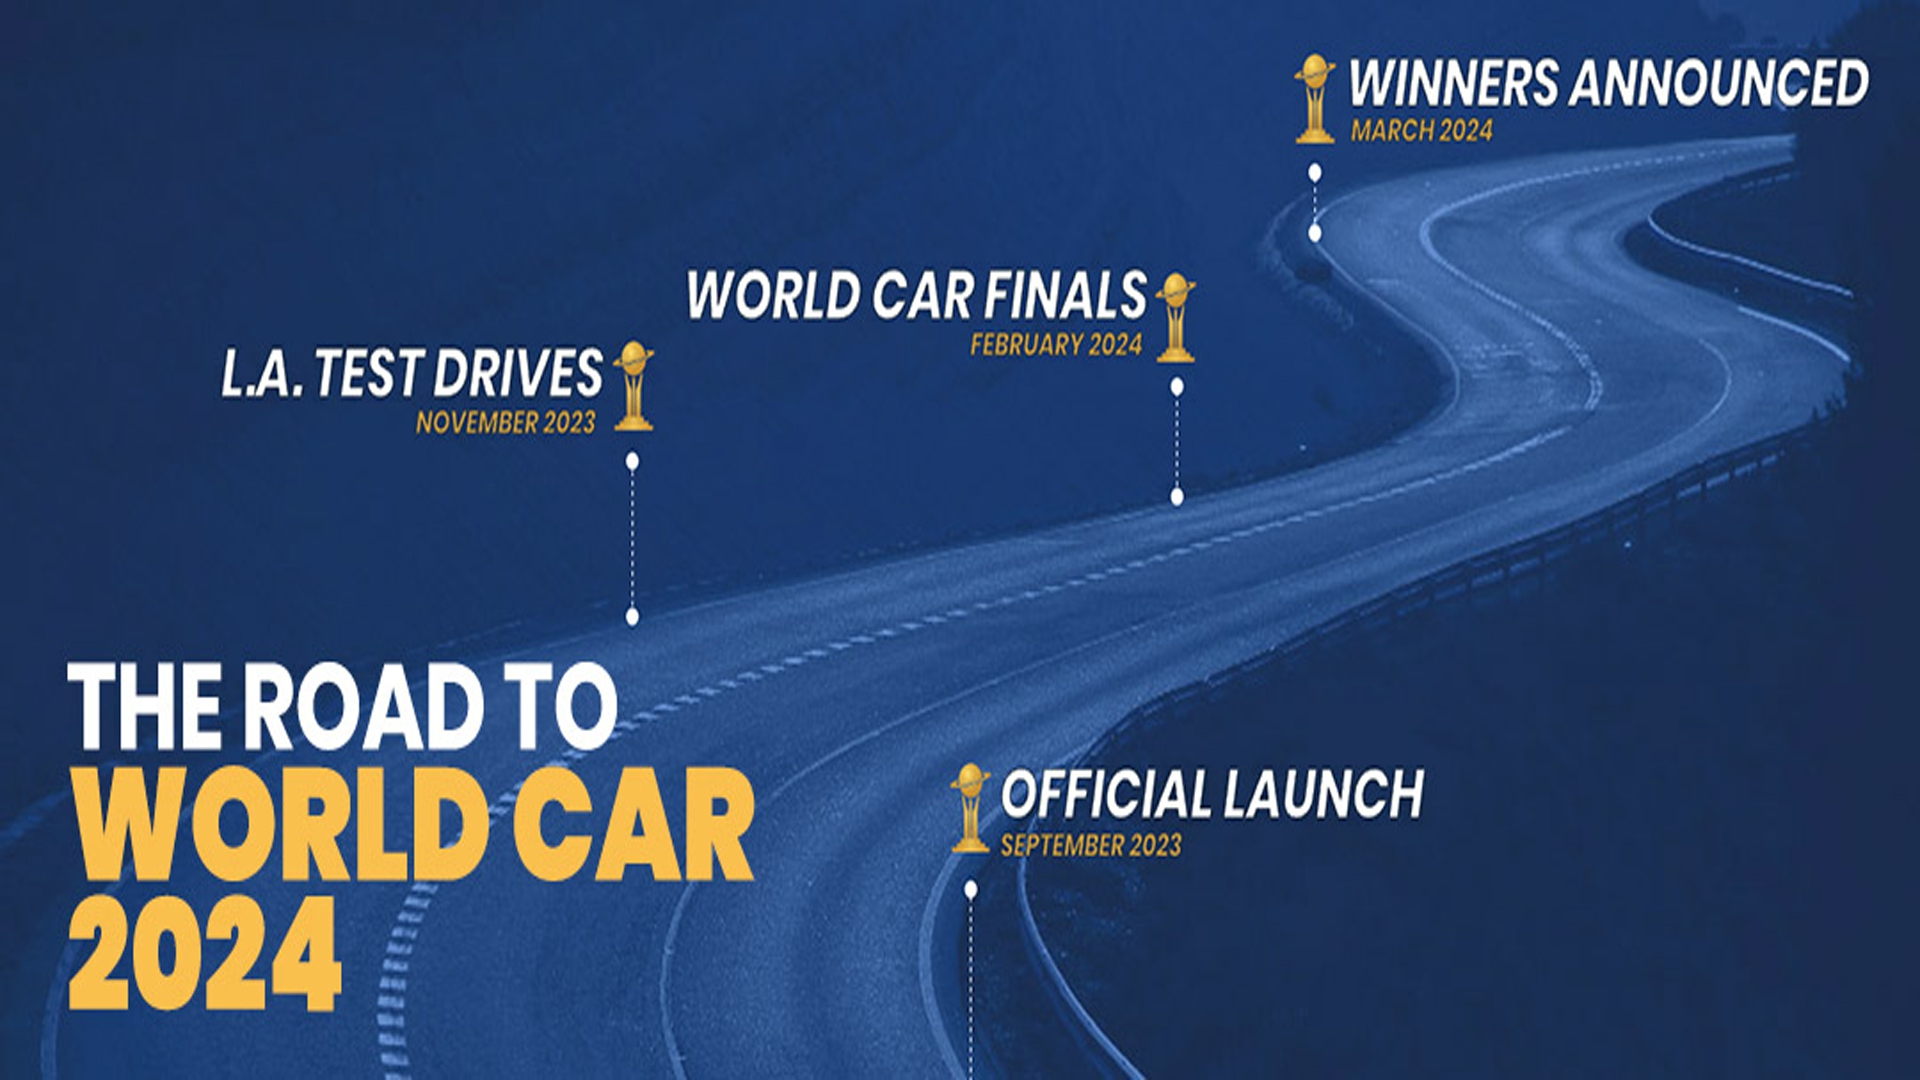 The Road To World Car Awards 2024